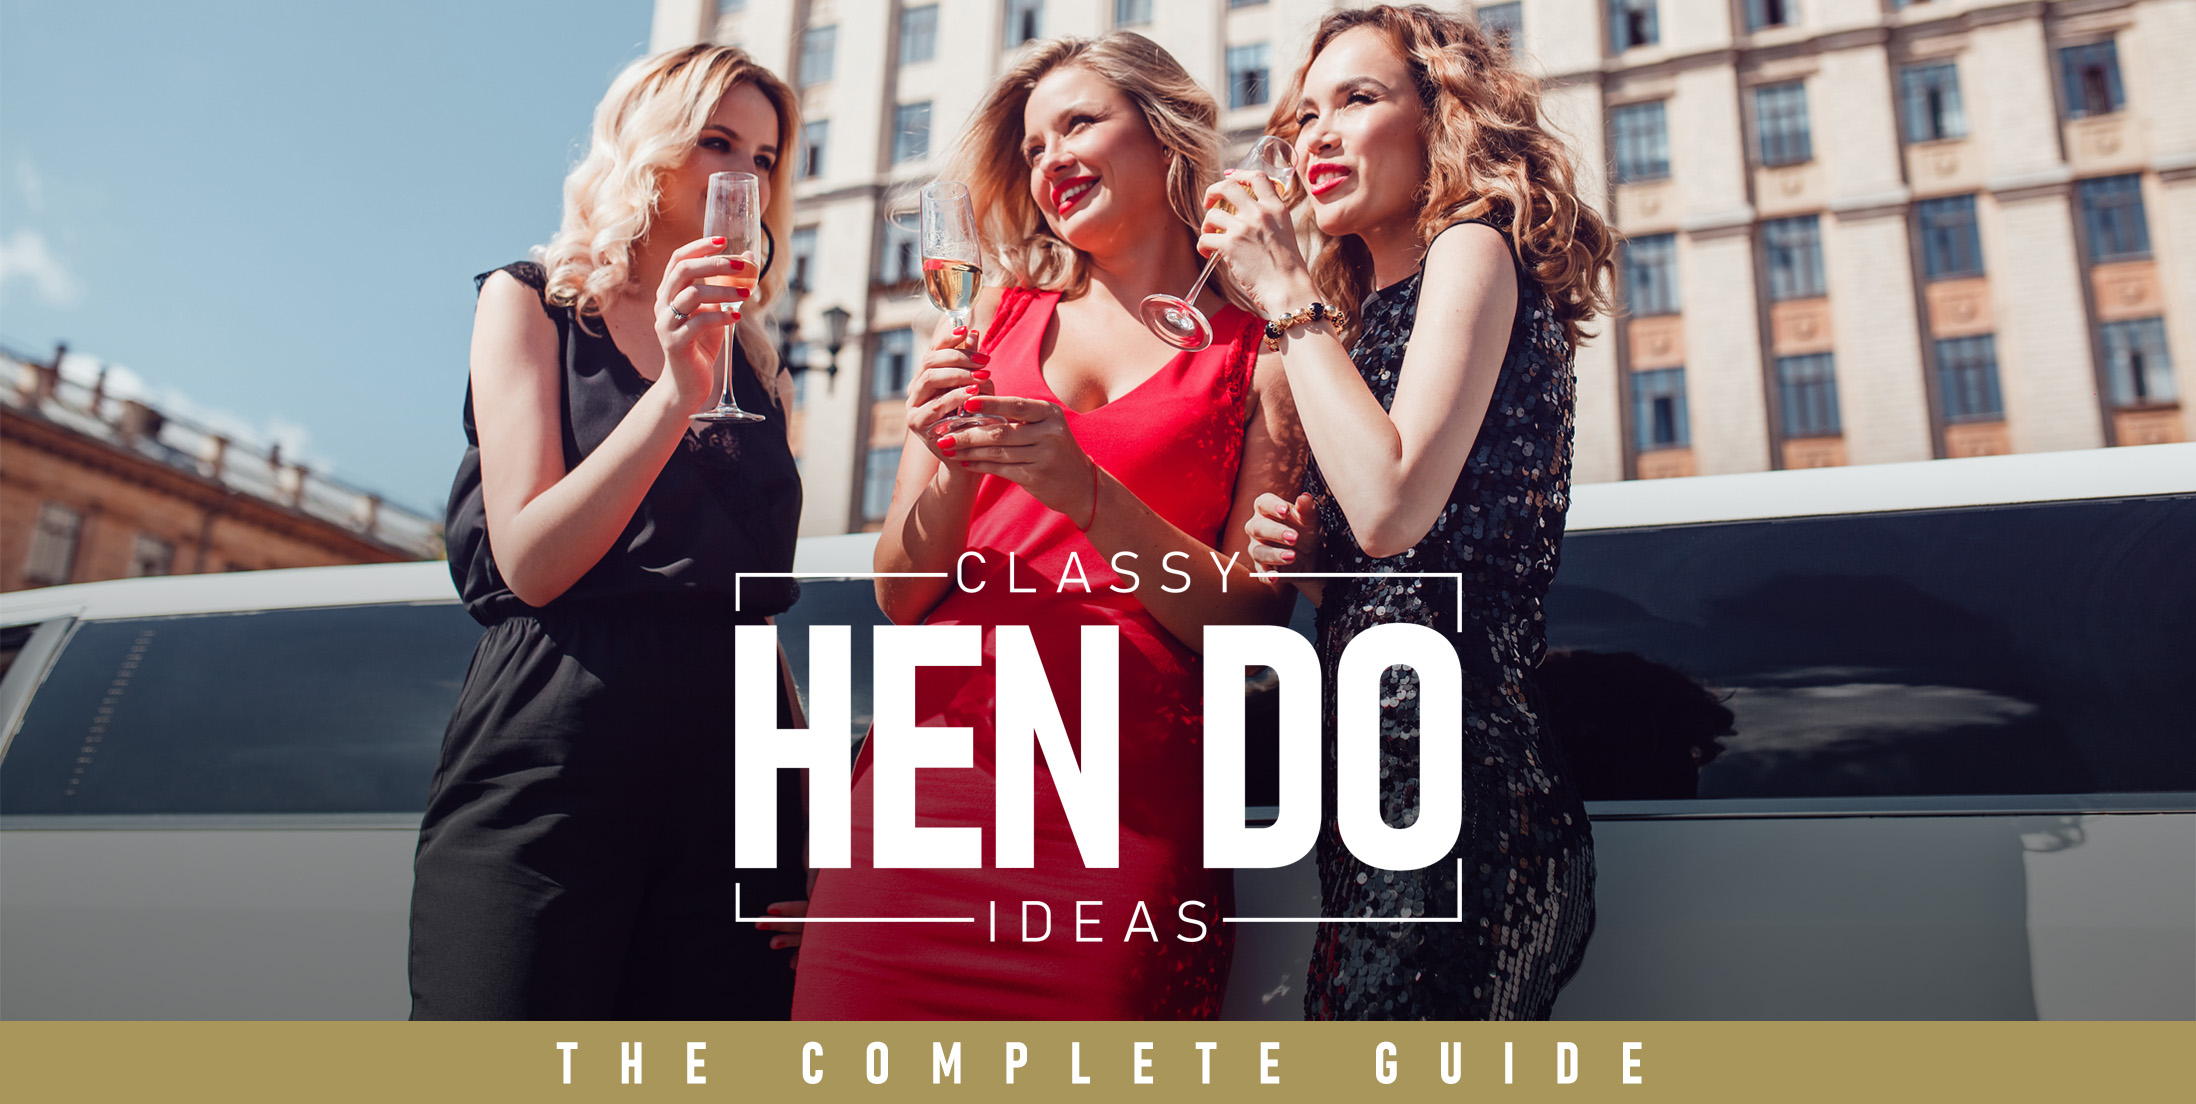 Classy Hen Do Ideas – The Complete Guide